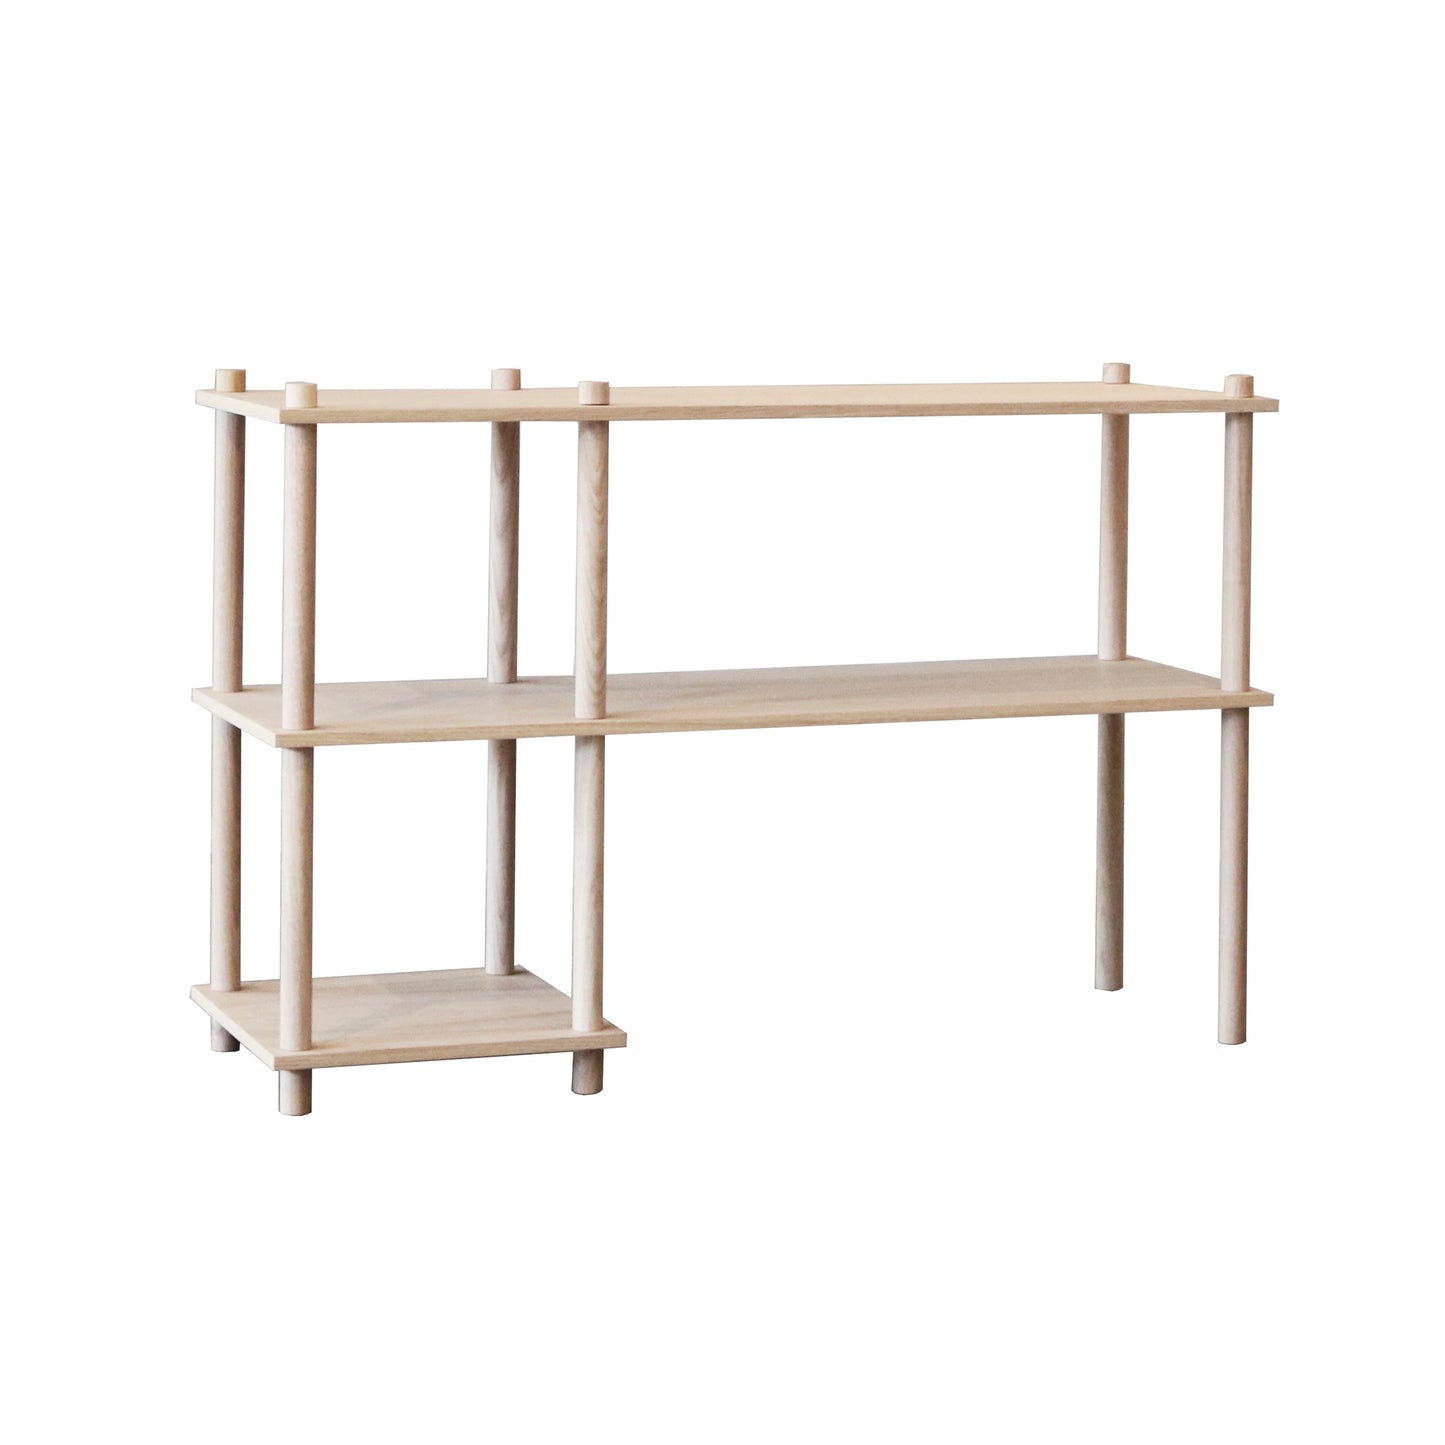 Elevate Shelving - System 2 by Woud